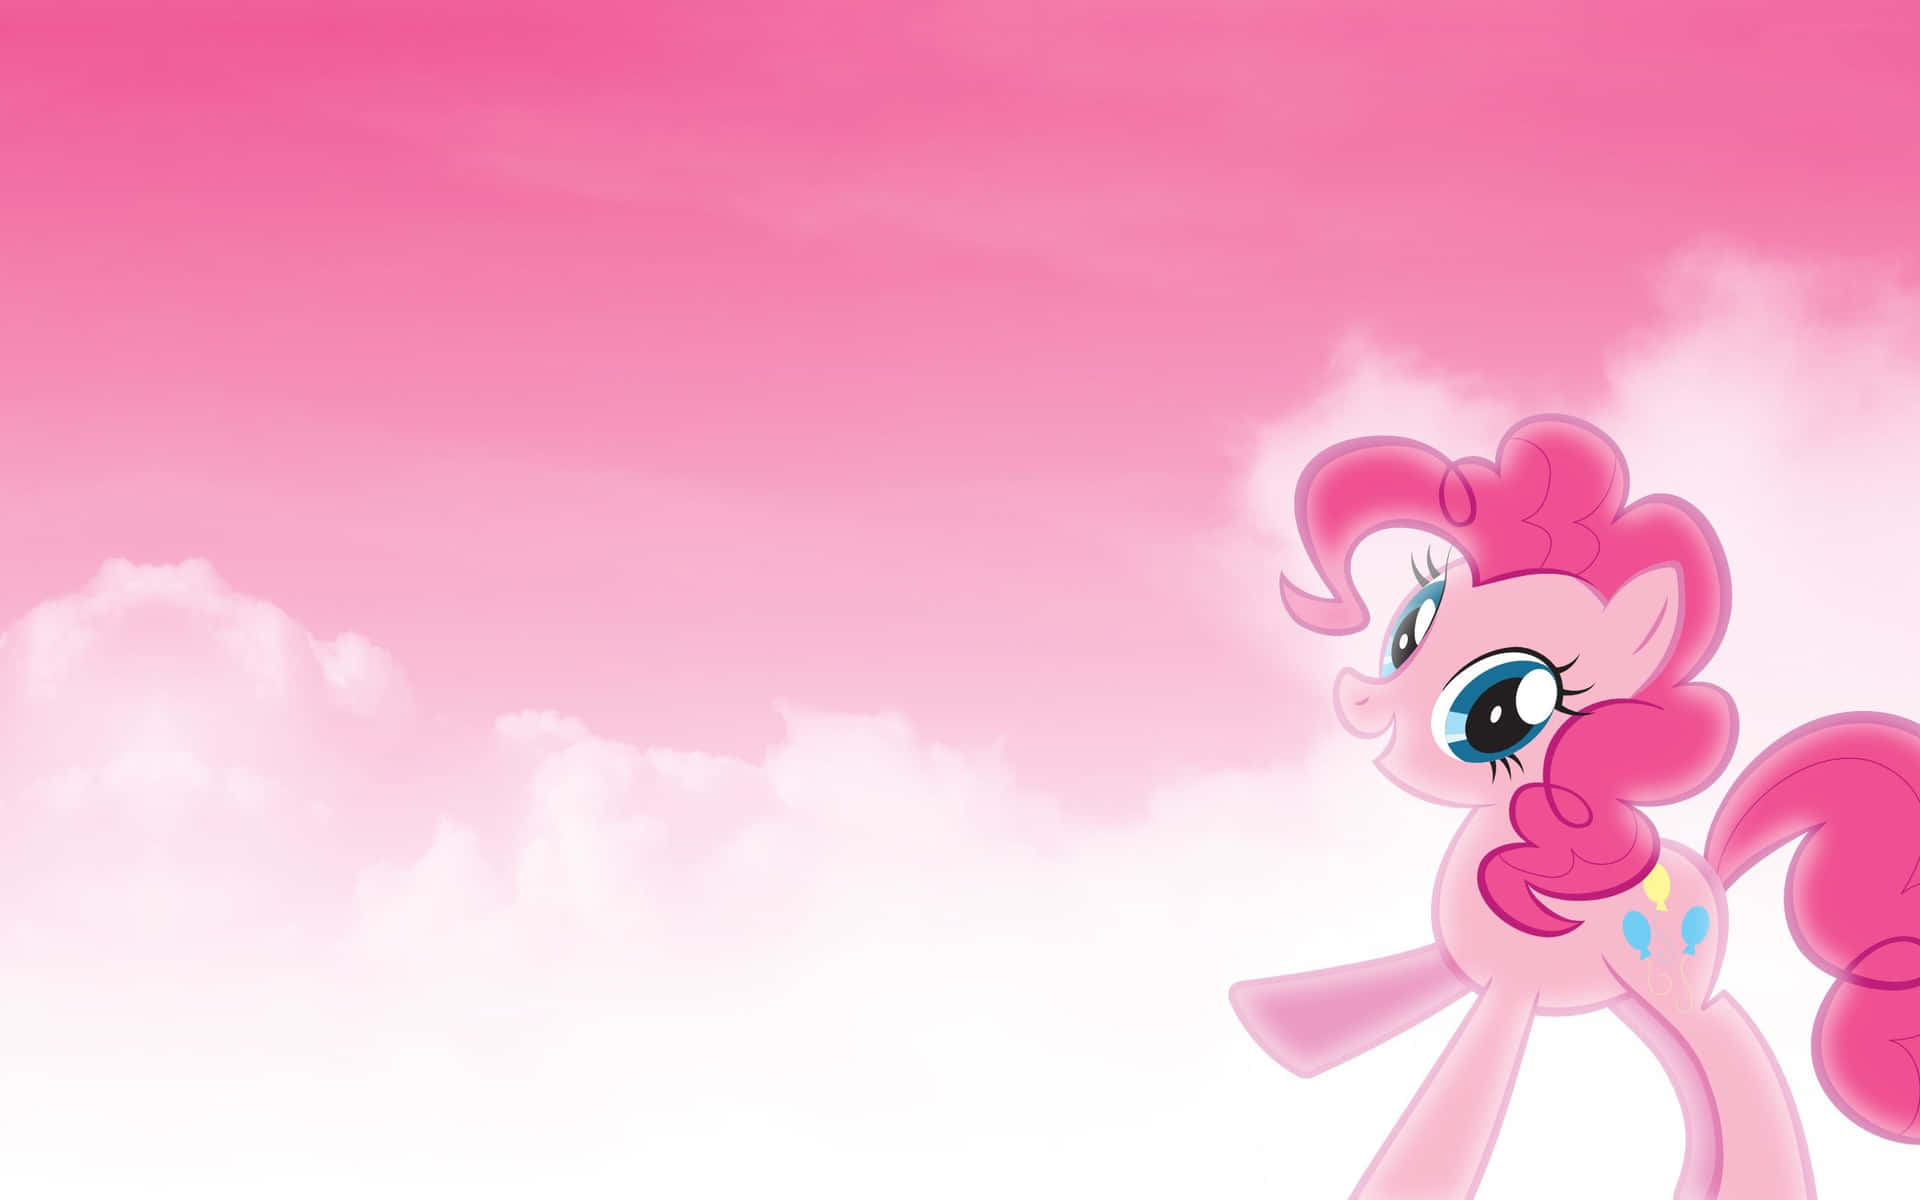 Passionatepinkie Pie Firar Livet - In Context Of Computer Or Mobile Wallpaper.